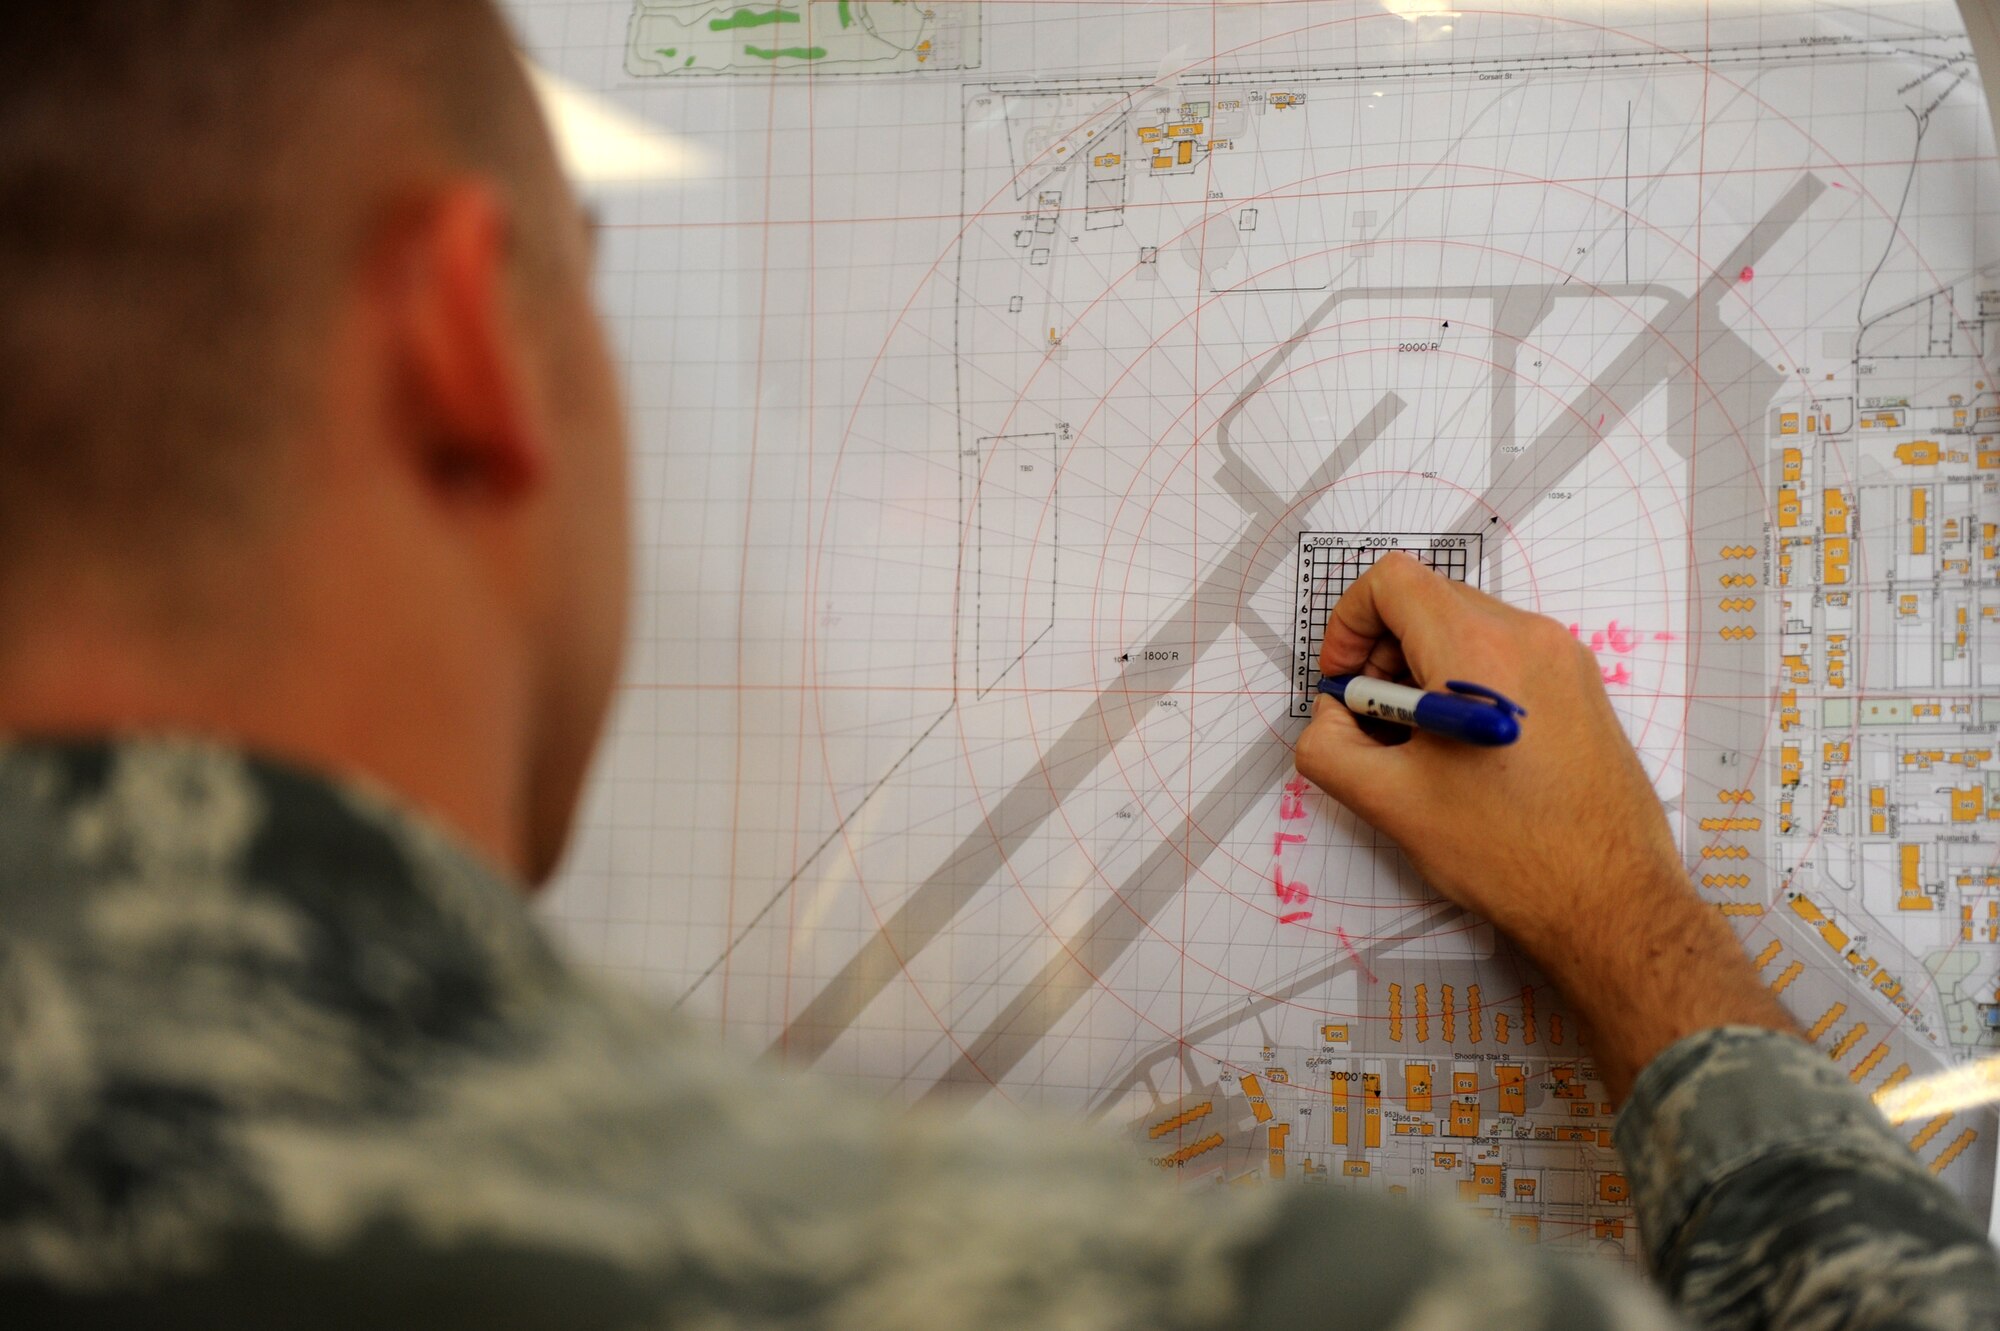 Senior Airman Jordan Stoltz, 56th Operations Support Squadron airfield management shift lead, maps a point on a Luke Air Force Base map Oct 13 2015. Airfield management is responsible for ground and flight safety ensuring the wellbeing of pilots at Luke Air Force Base. (U.S. Air Force photo by Staff Sgt. Staci Miller)